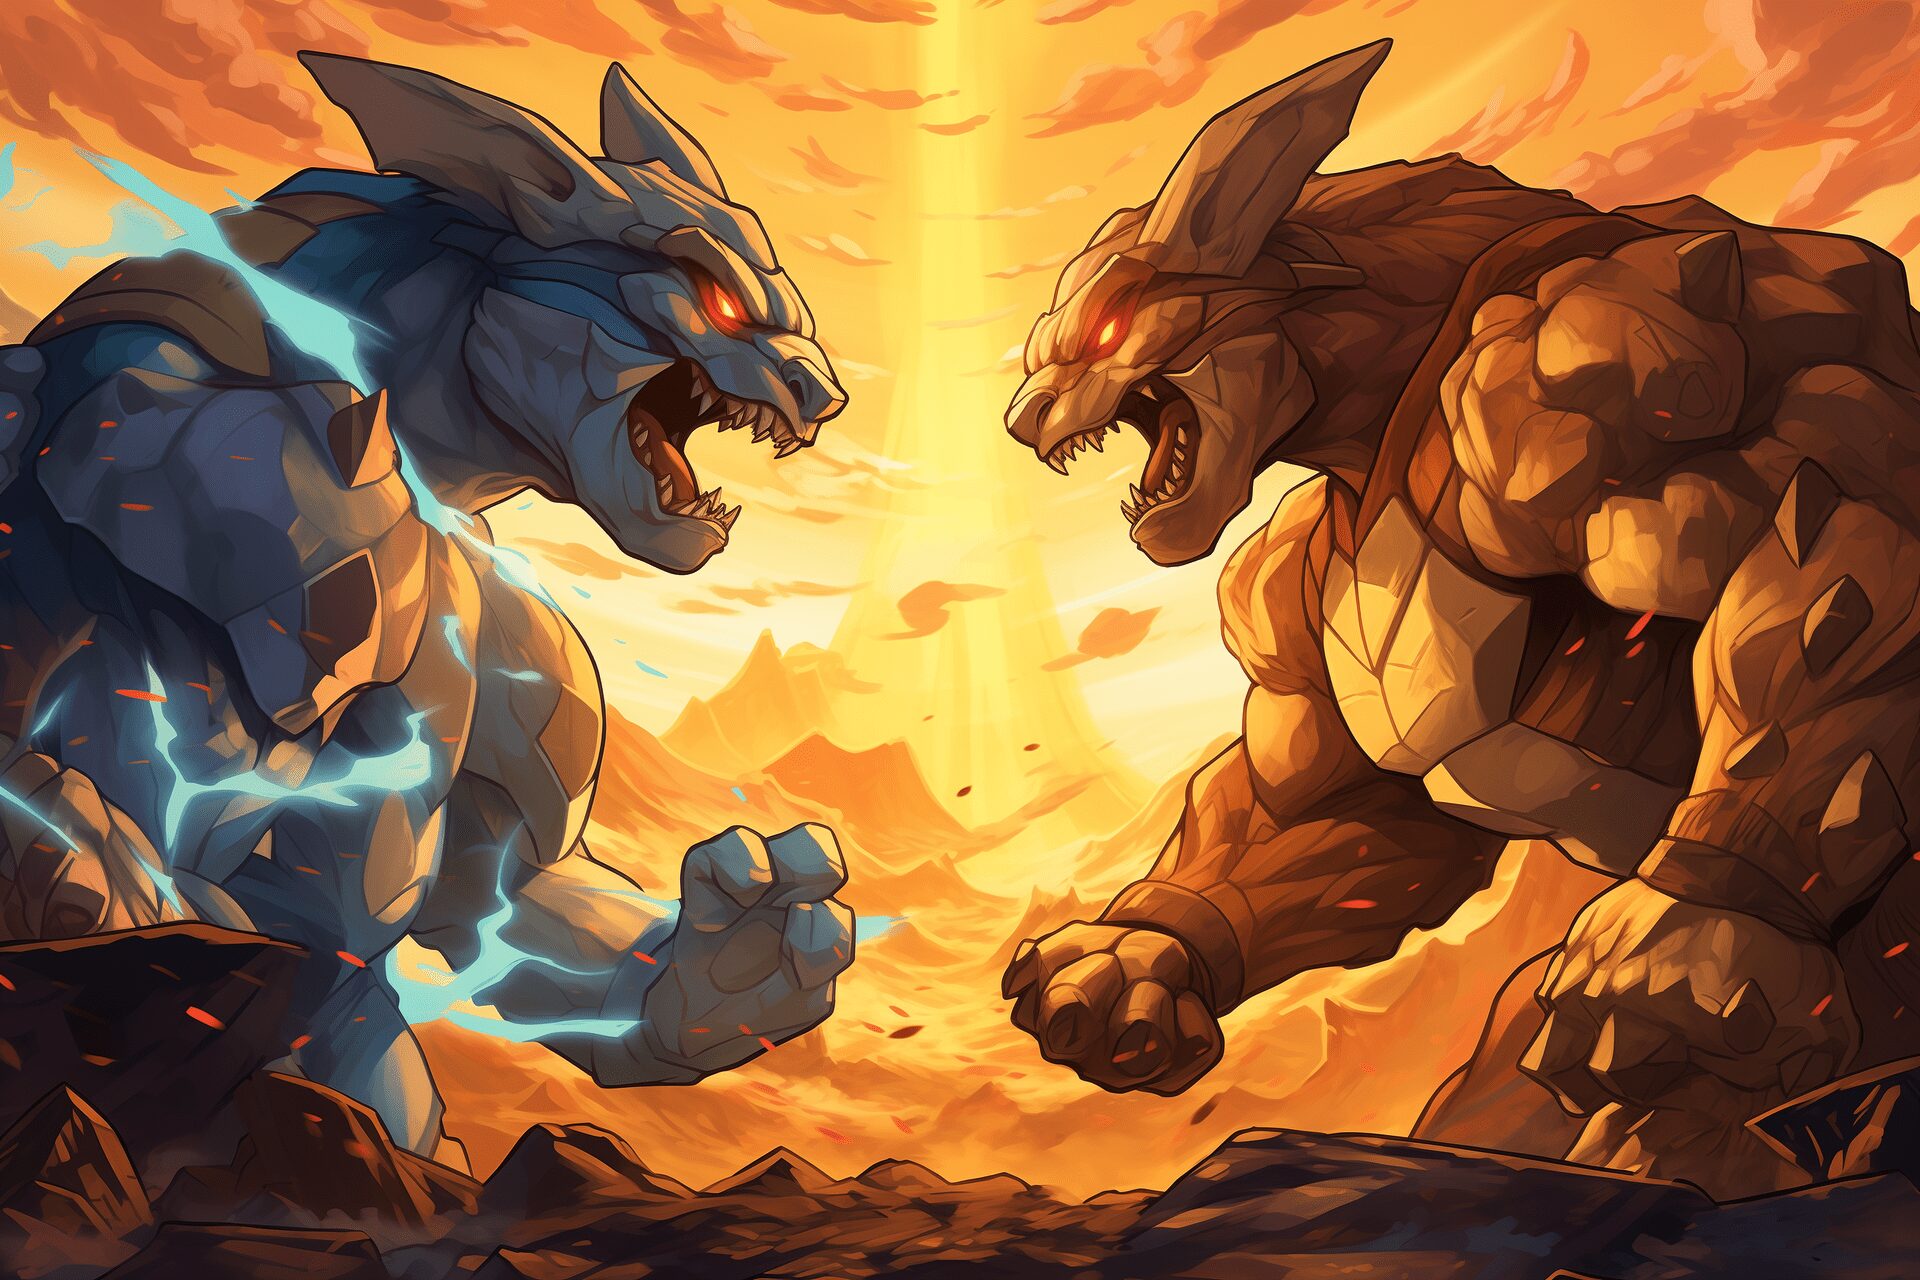 Fan art inspired by Rivals of Aether